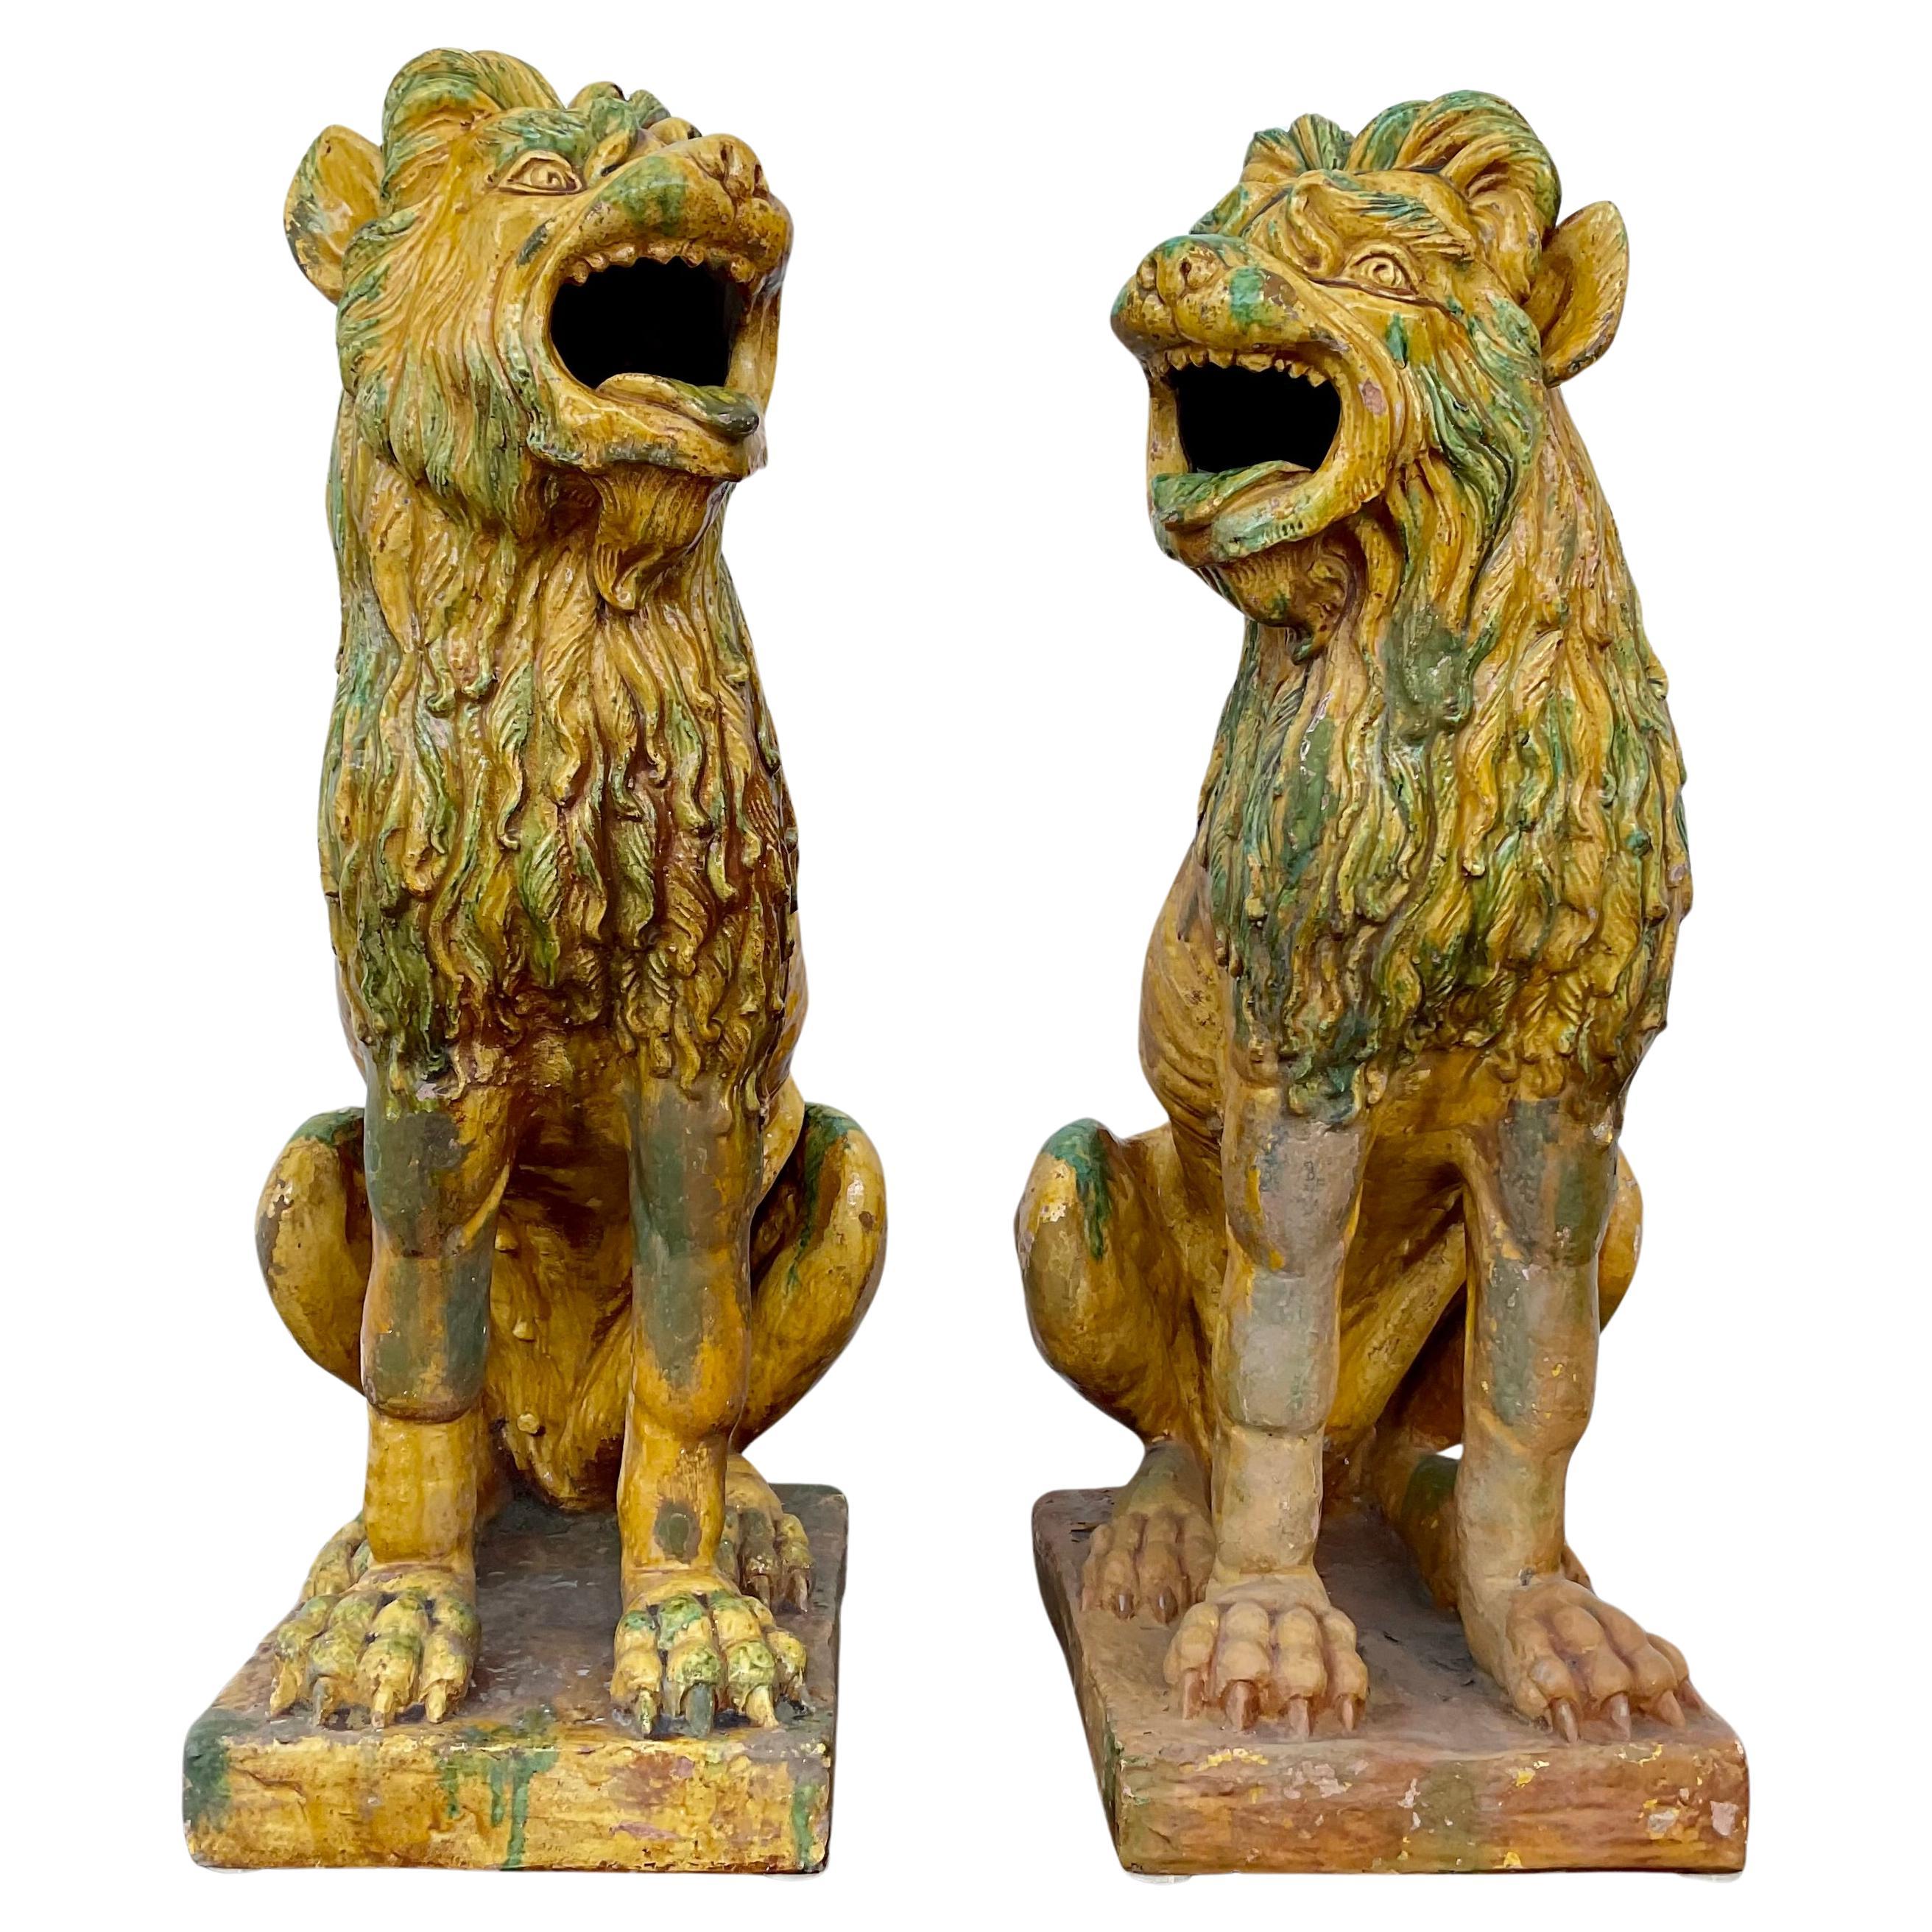 Extraordinary pair of fine and rare and very large pair of glazed terra cotta decorative foo dog or lion statutes, circa early 20th century. Glazed in green, yellow and red with slight difference indicating they are hand made. Used to guard the